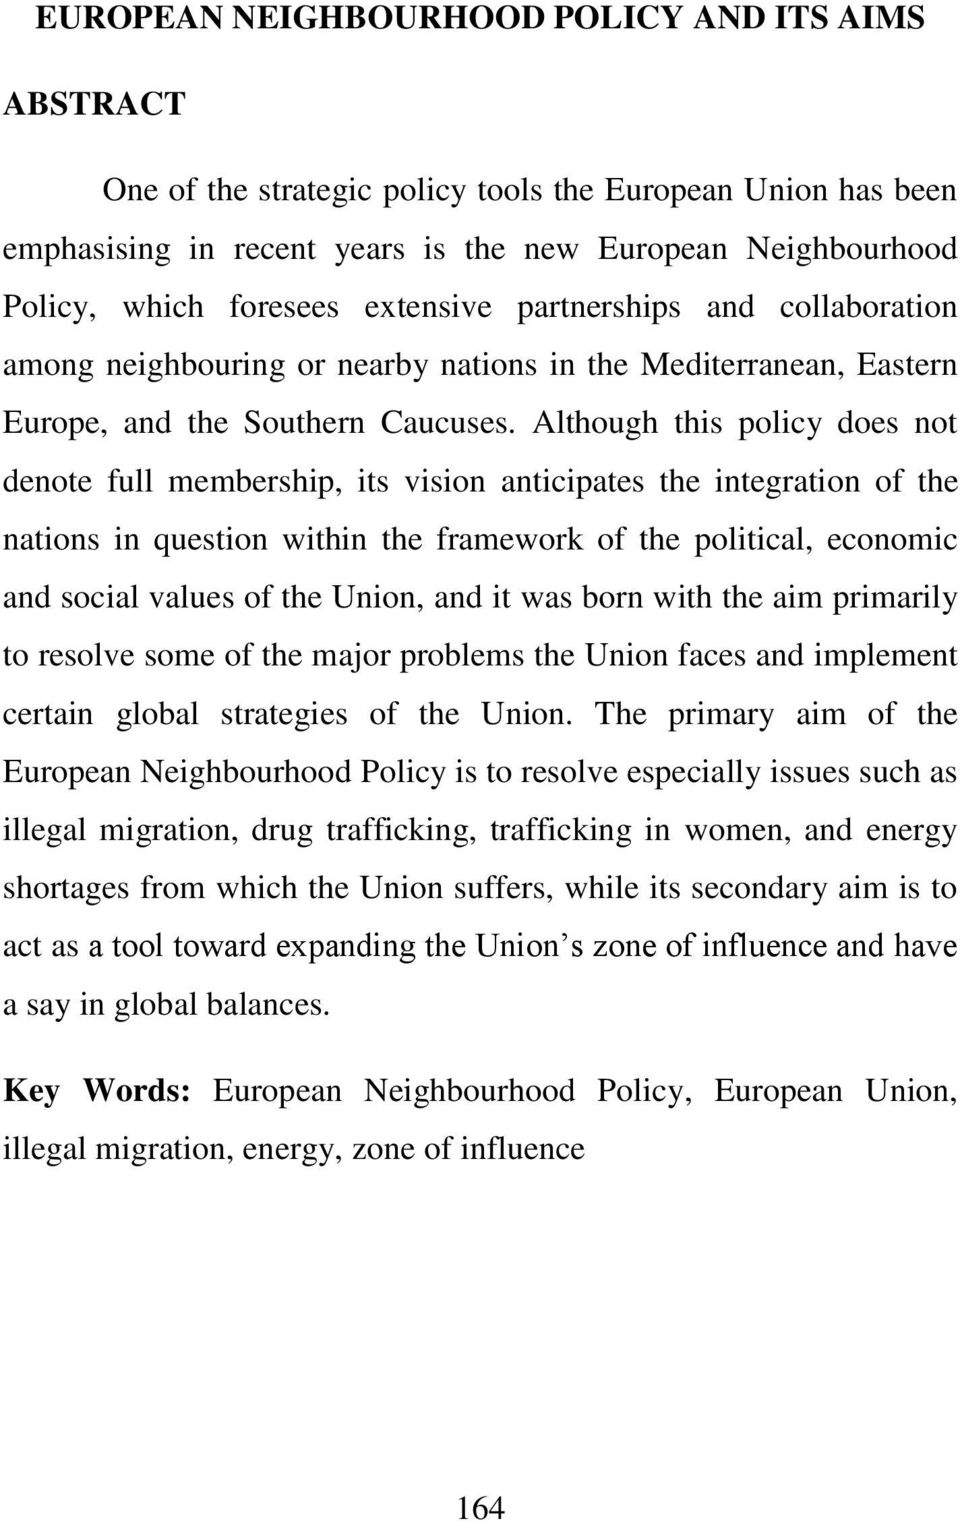 Although this policy does not denote full membership, its vision anticipates the integration of the nations in question within the framework of the political, economic and social values of the Union,